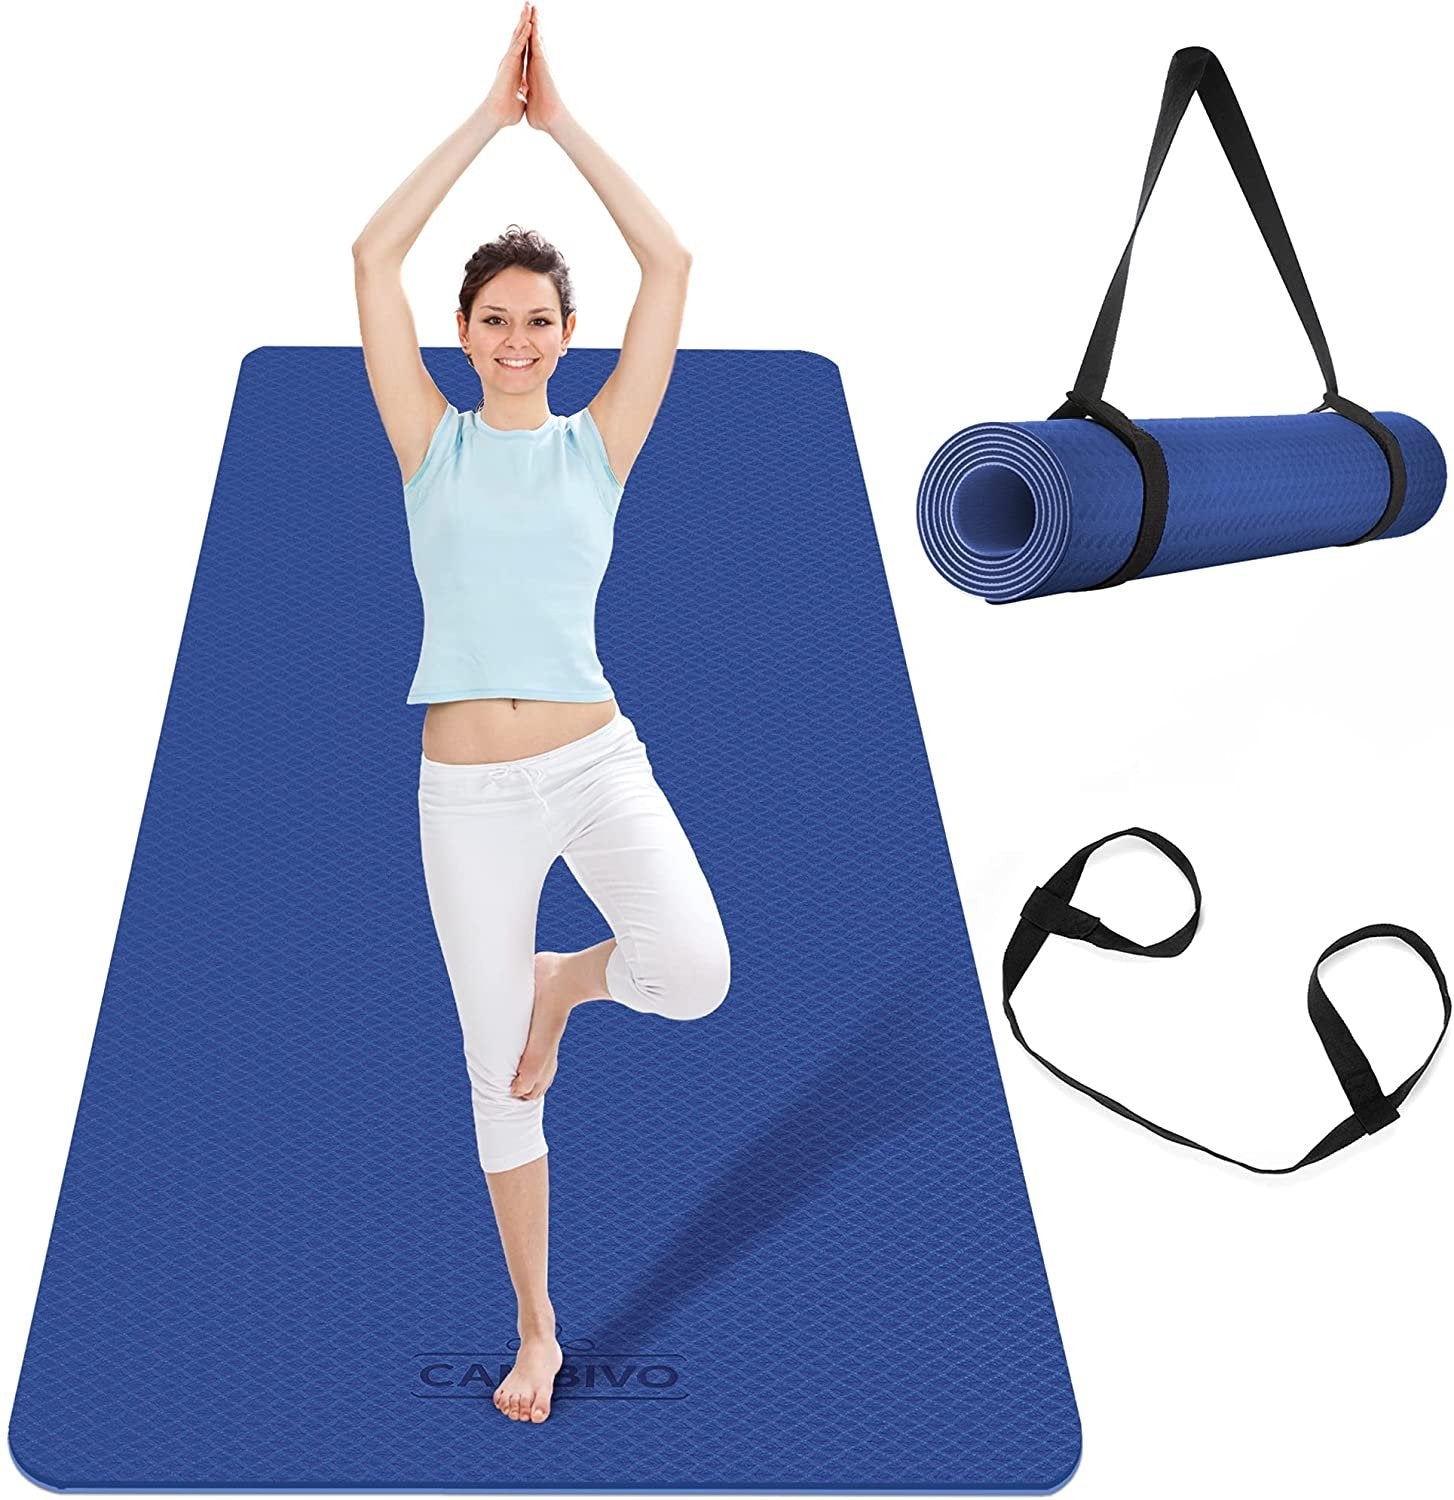 Outdoor Yoga Mat for Fitness & Workout